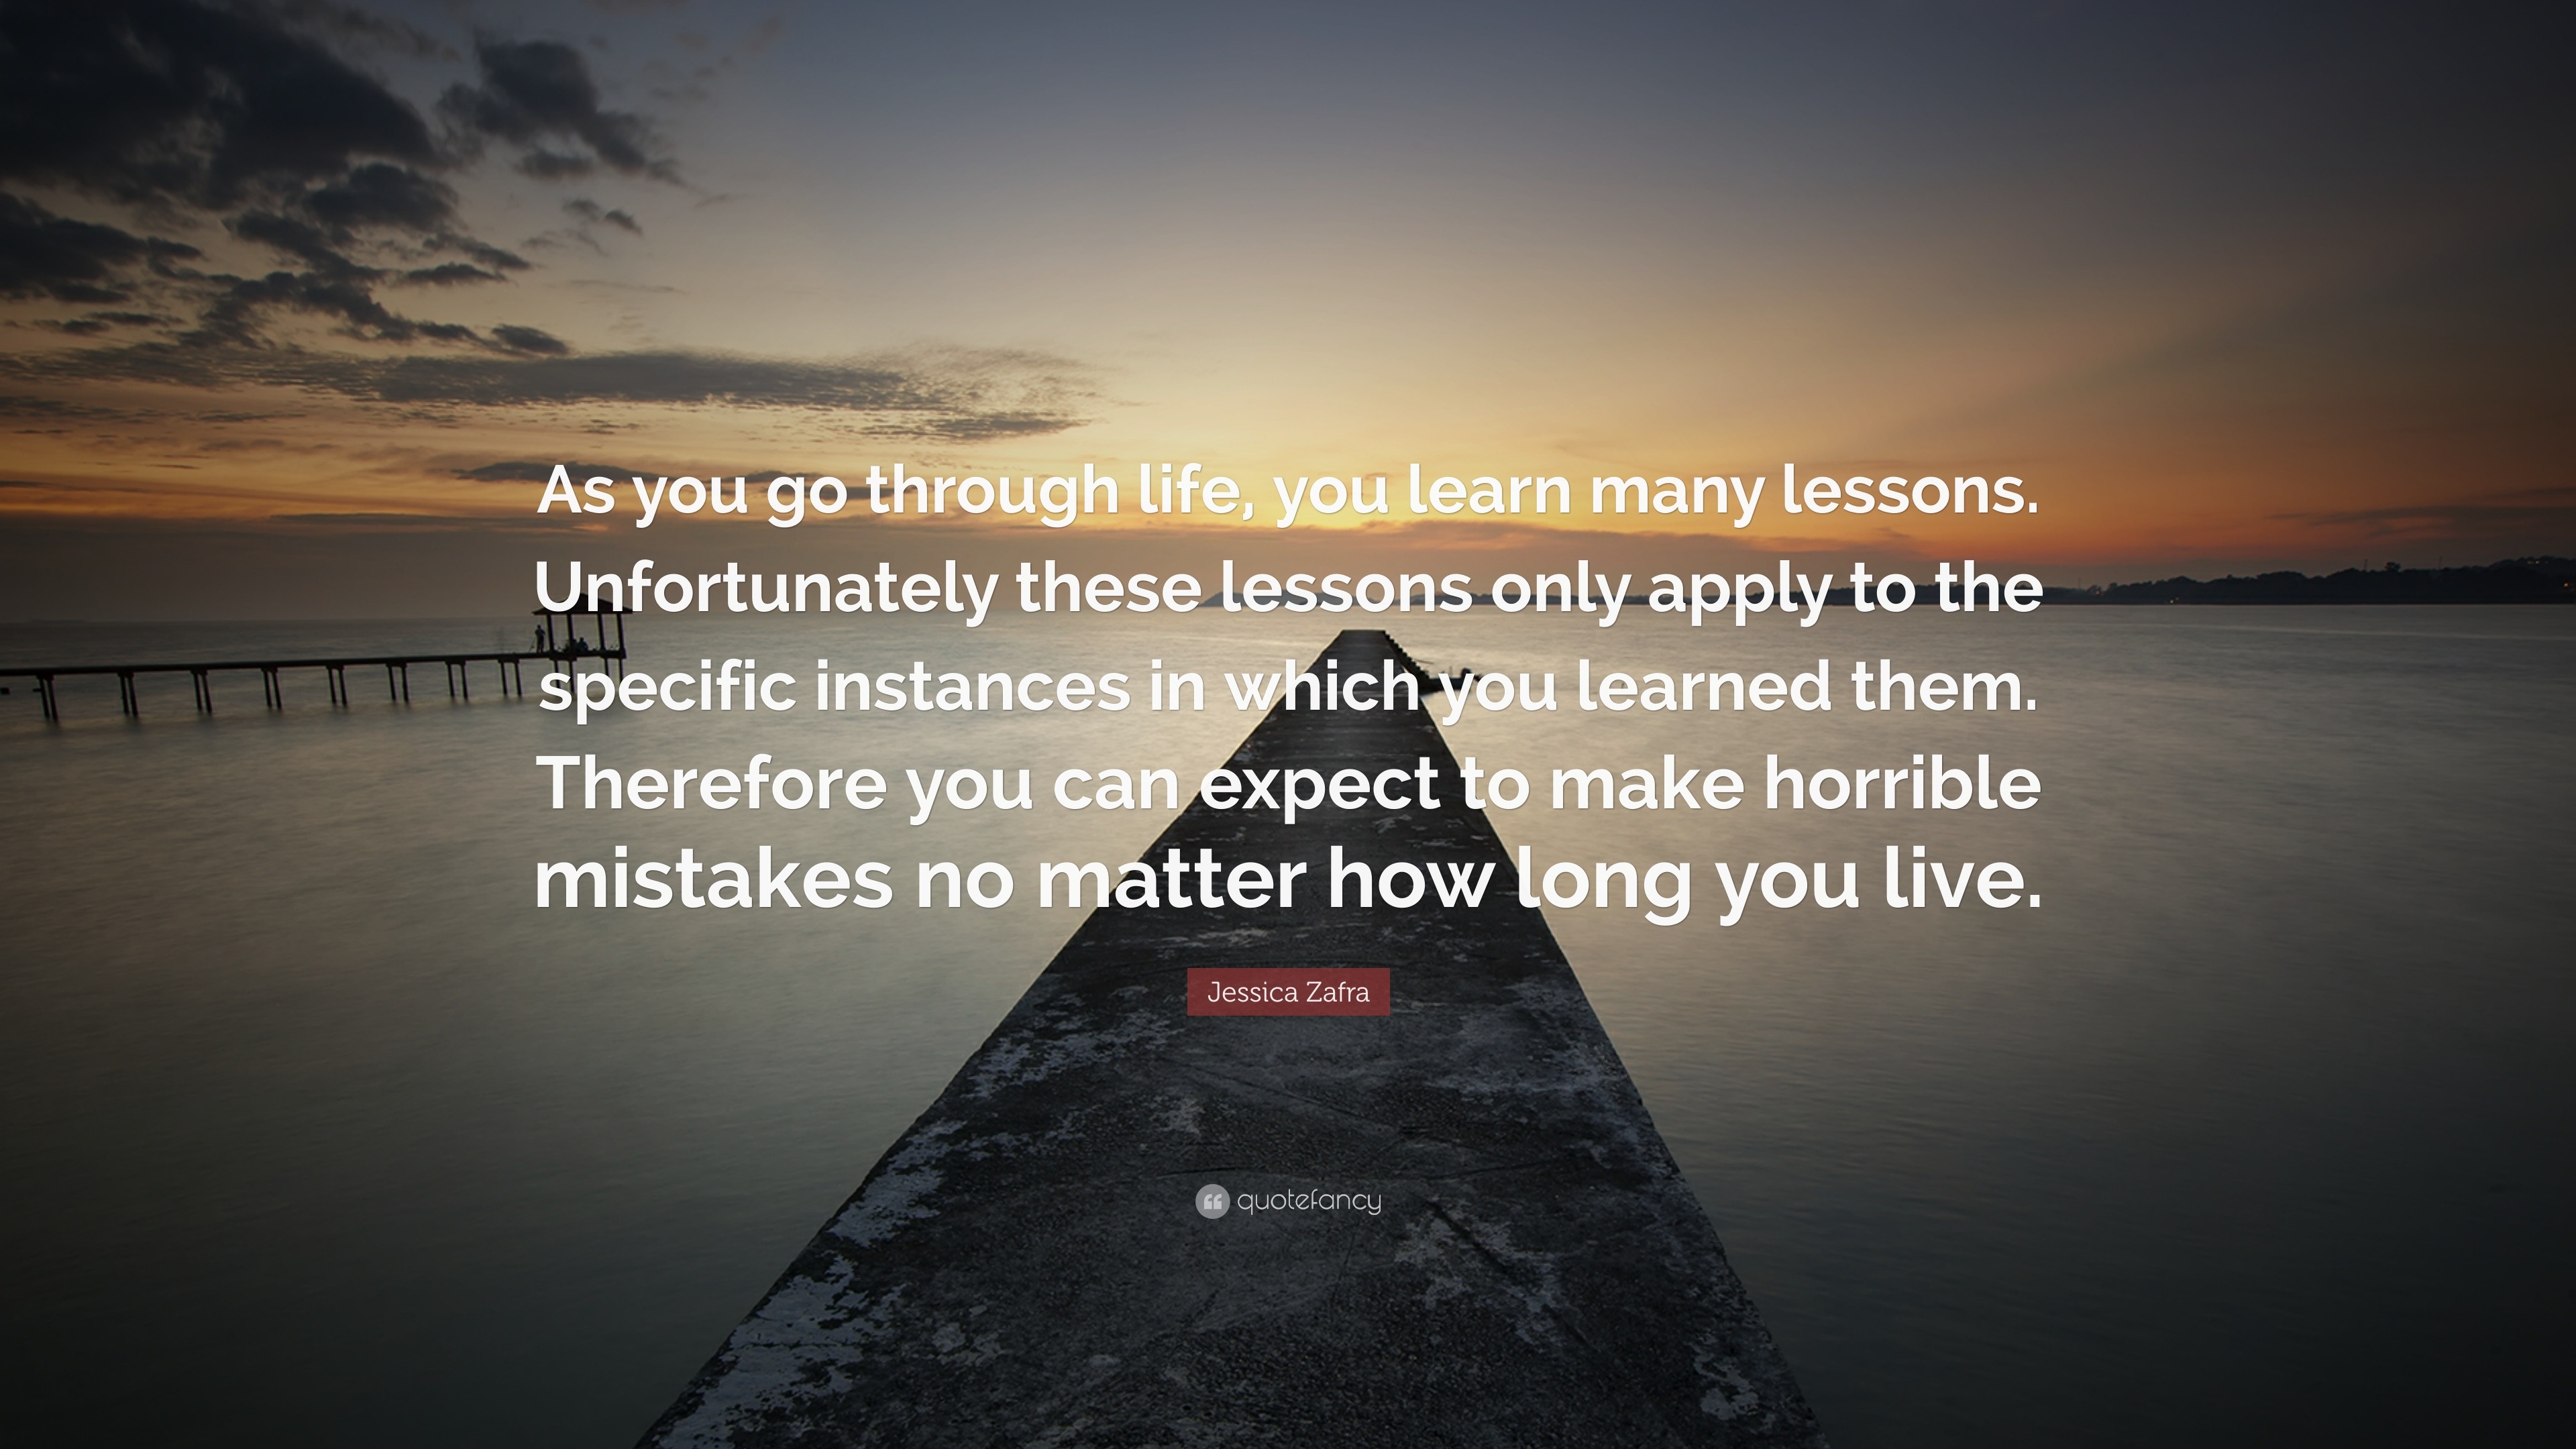 Jessica Zafra Quote: “As you go through life, you learn many lessons ...